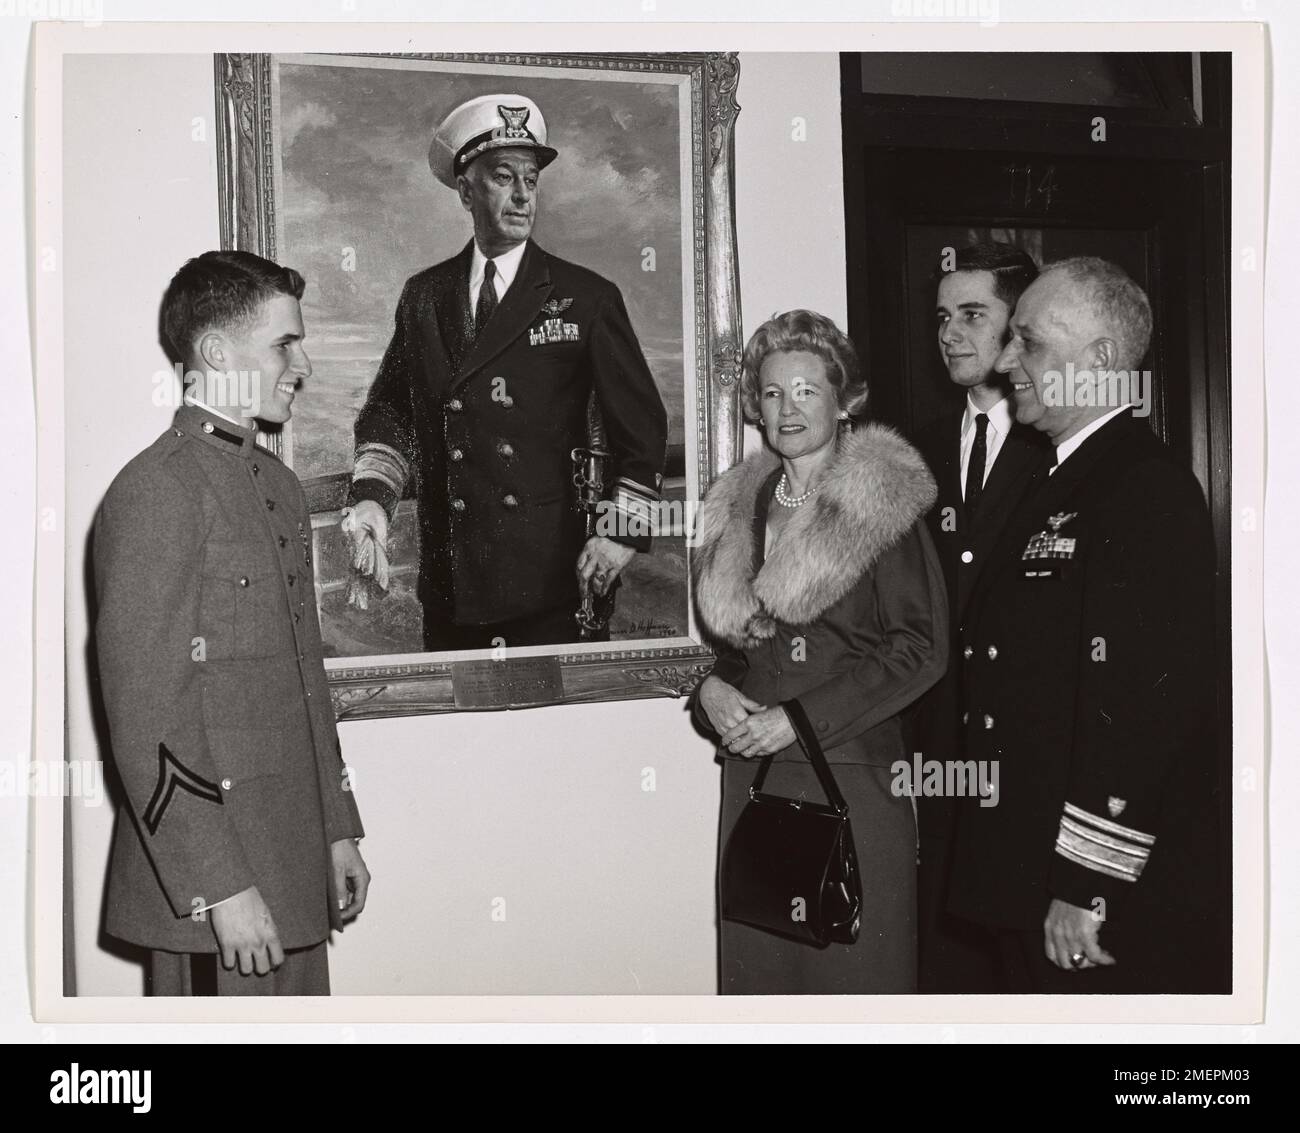 Painting of Rear Admiral Frank A. Leamy. Picture shows a group standing around an oil painting of Frank A. Leamy. Stock Photo